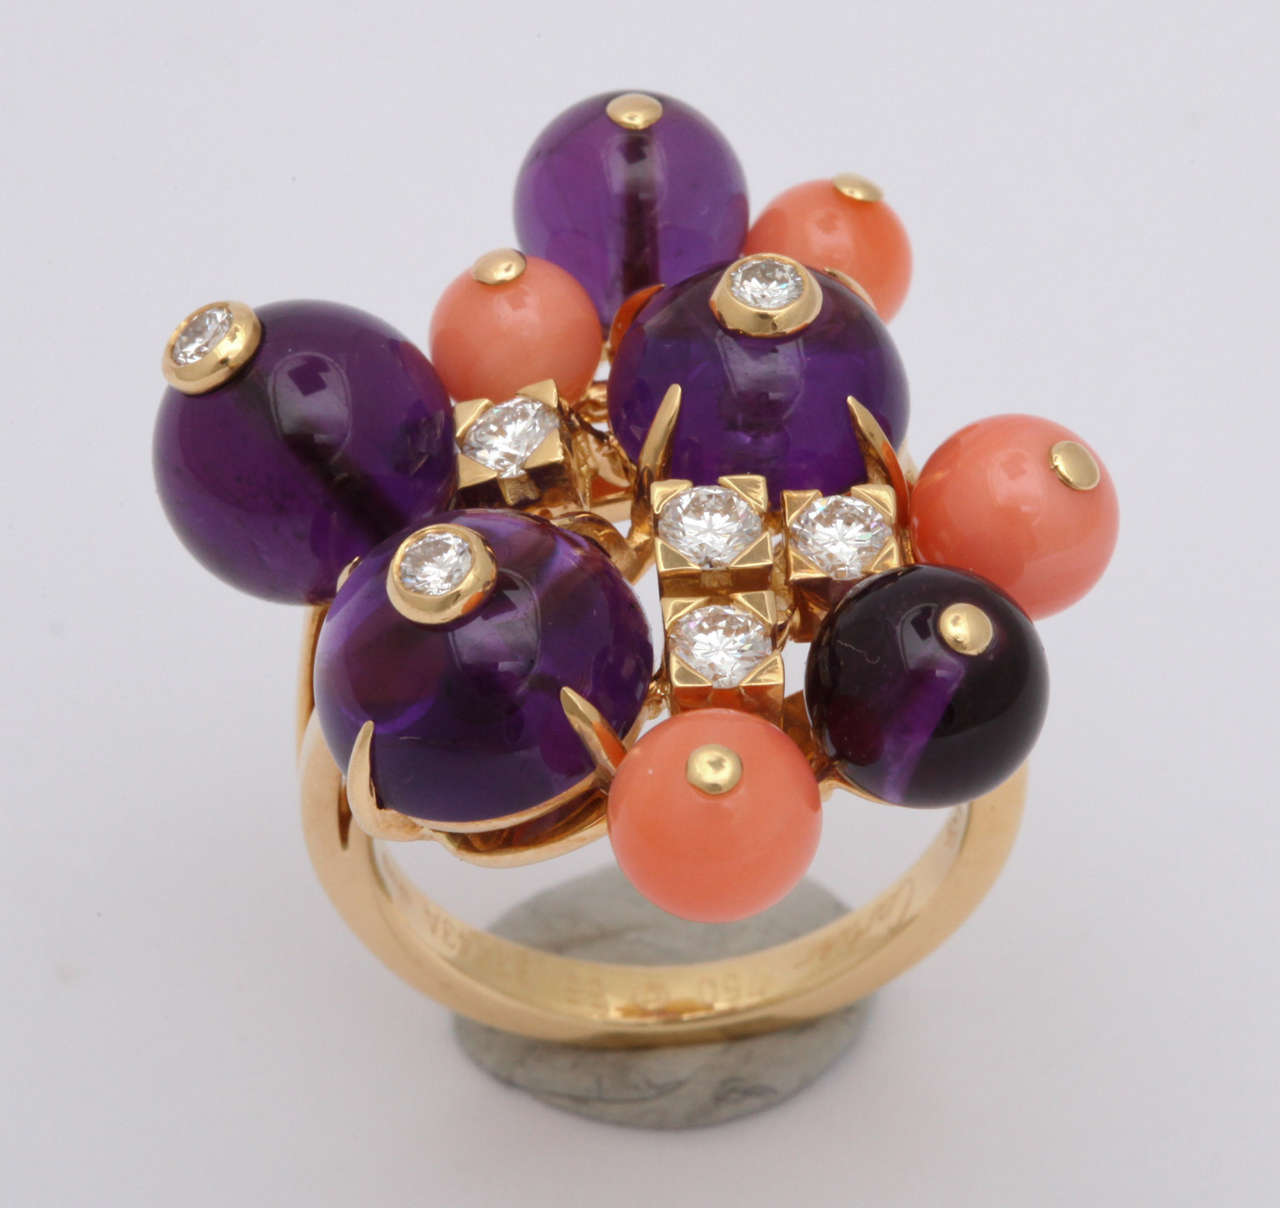 18KT Yellow gold ring set with Cabochon Amethyst stones and Coral round beads embellished with 7 full cut high quality diamonds signed Cartier Paris